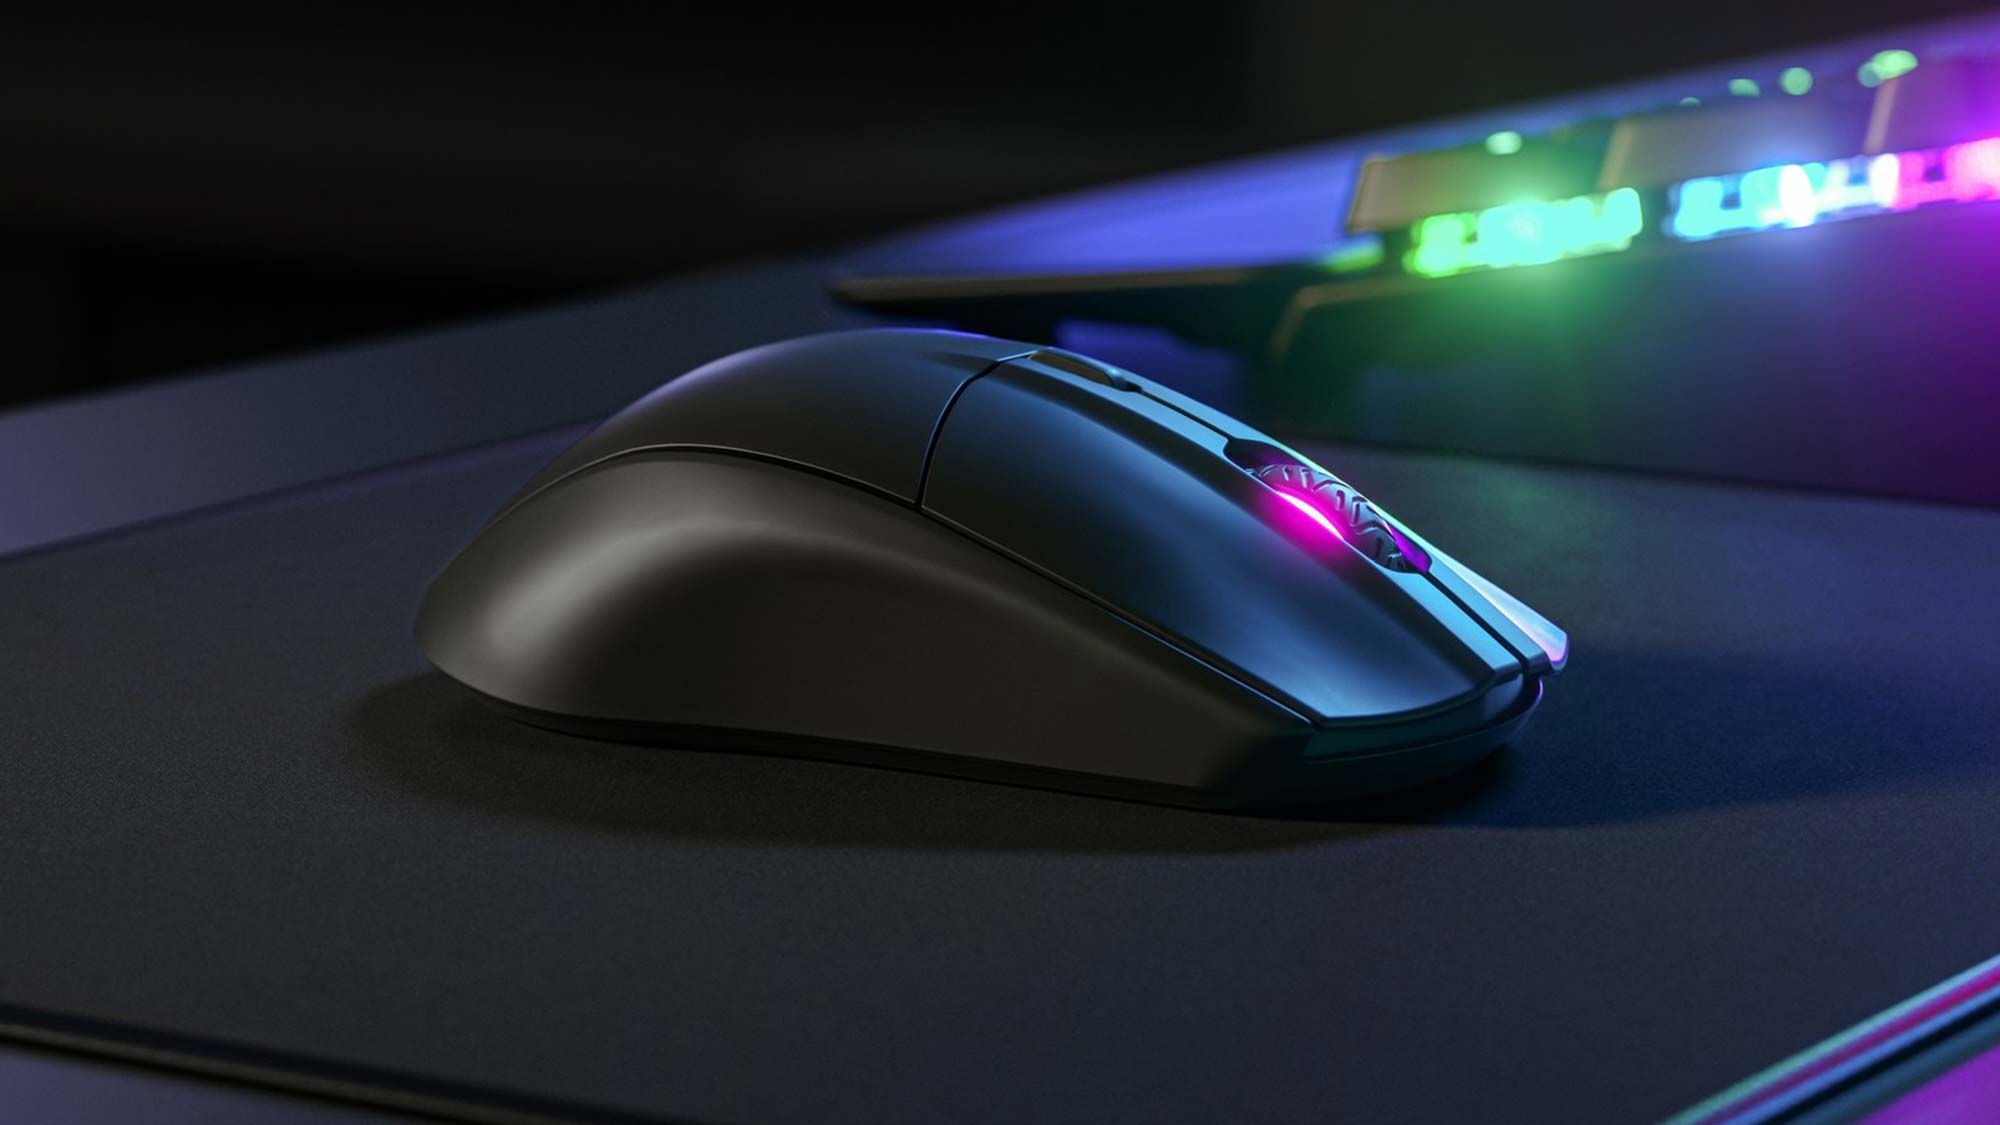 Best wireless gaming mouse: SteelSeries Rival 300 Wireless